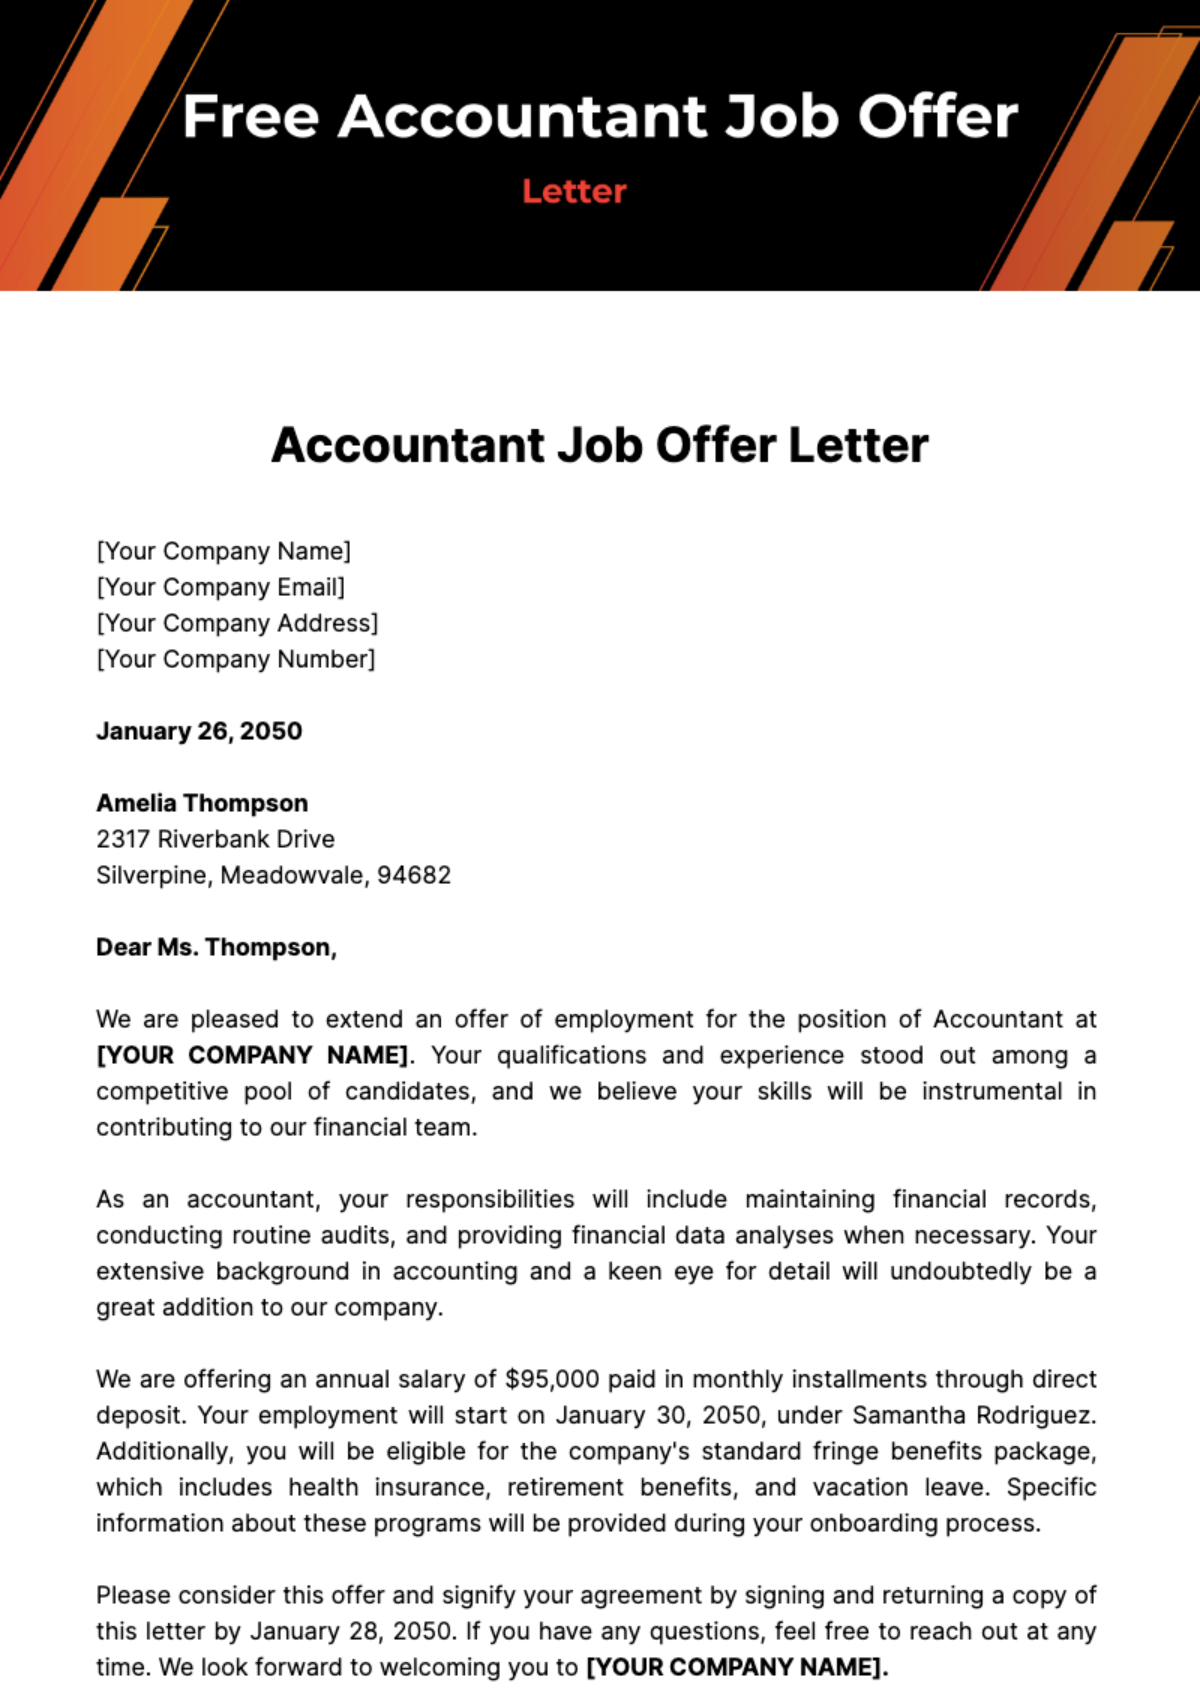 Free Accountant Job Offer Letter Template